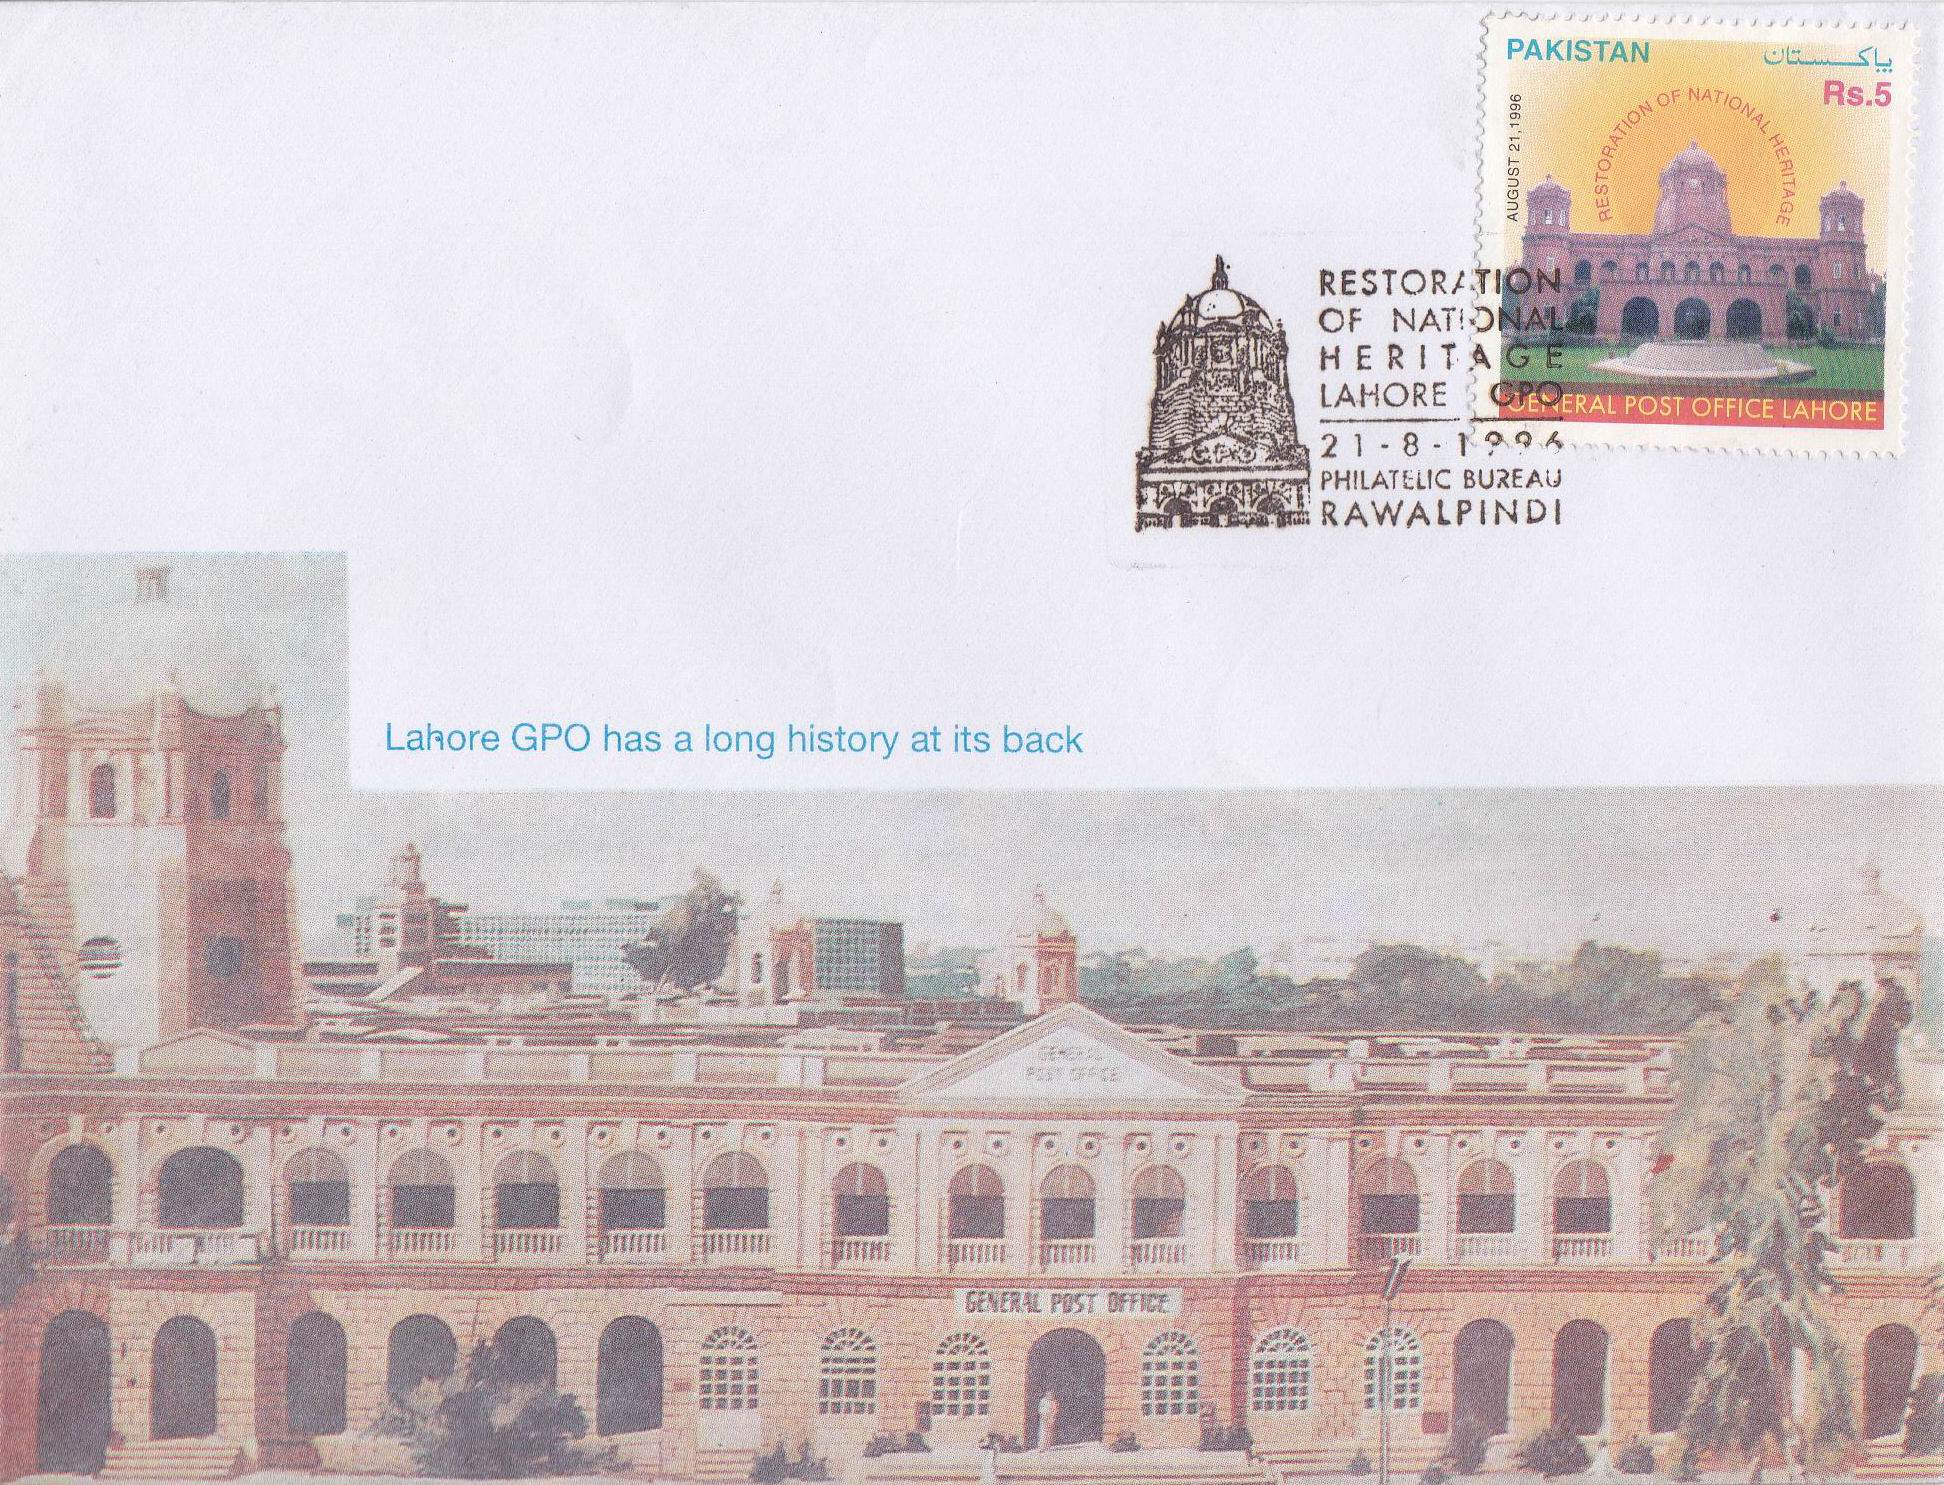 Pakistan Fdc 1996 Brochure Stamp Lahore GPO - Click Image to Close